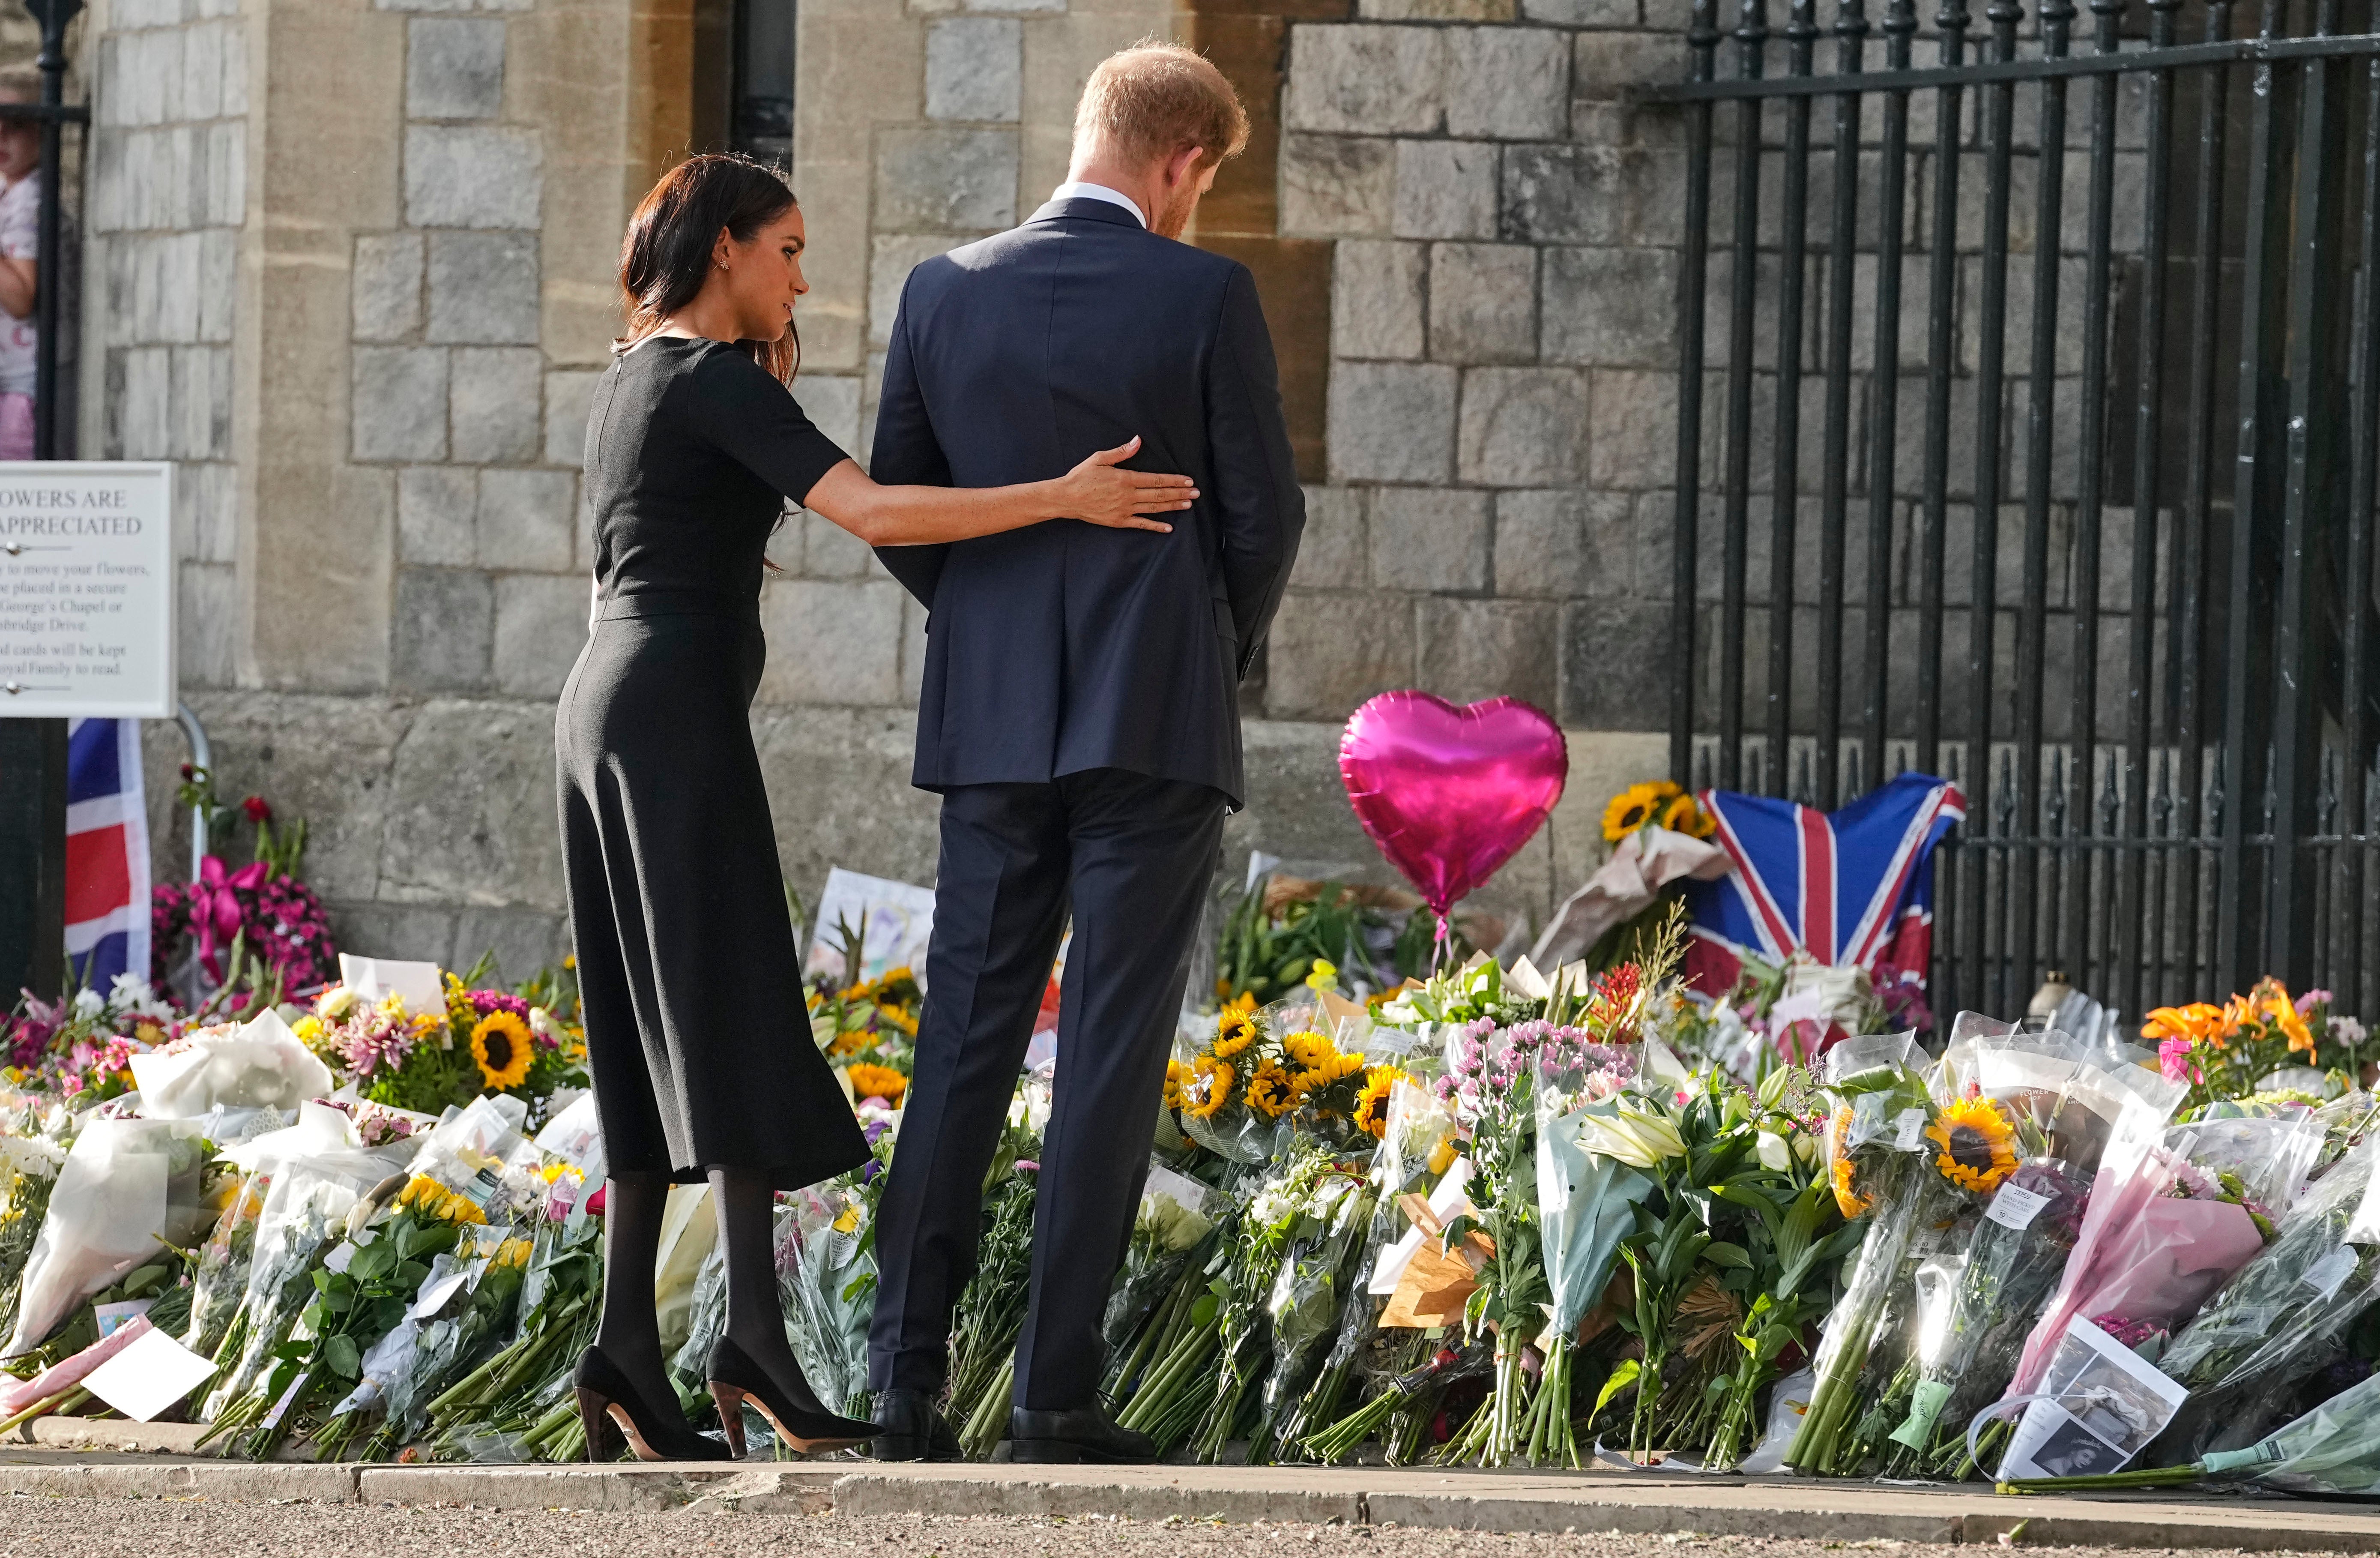 The Duke and Duchess of Sussex are expected to stay in the UK until the Queen’s funeral